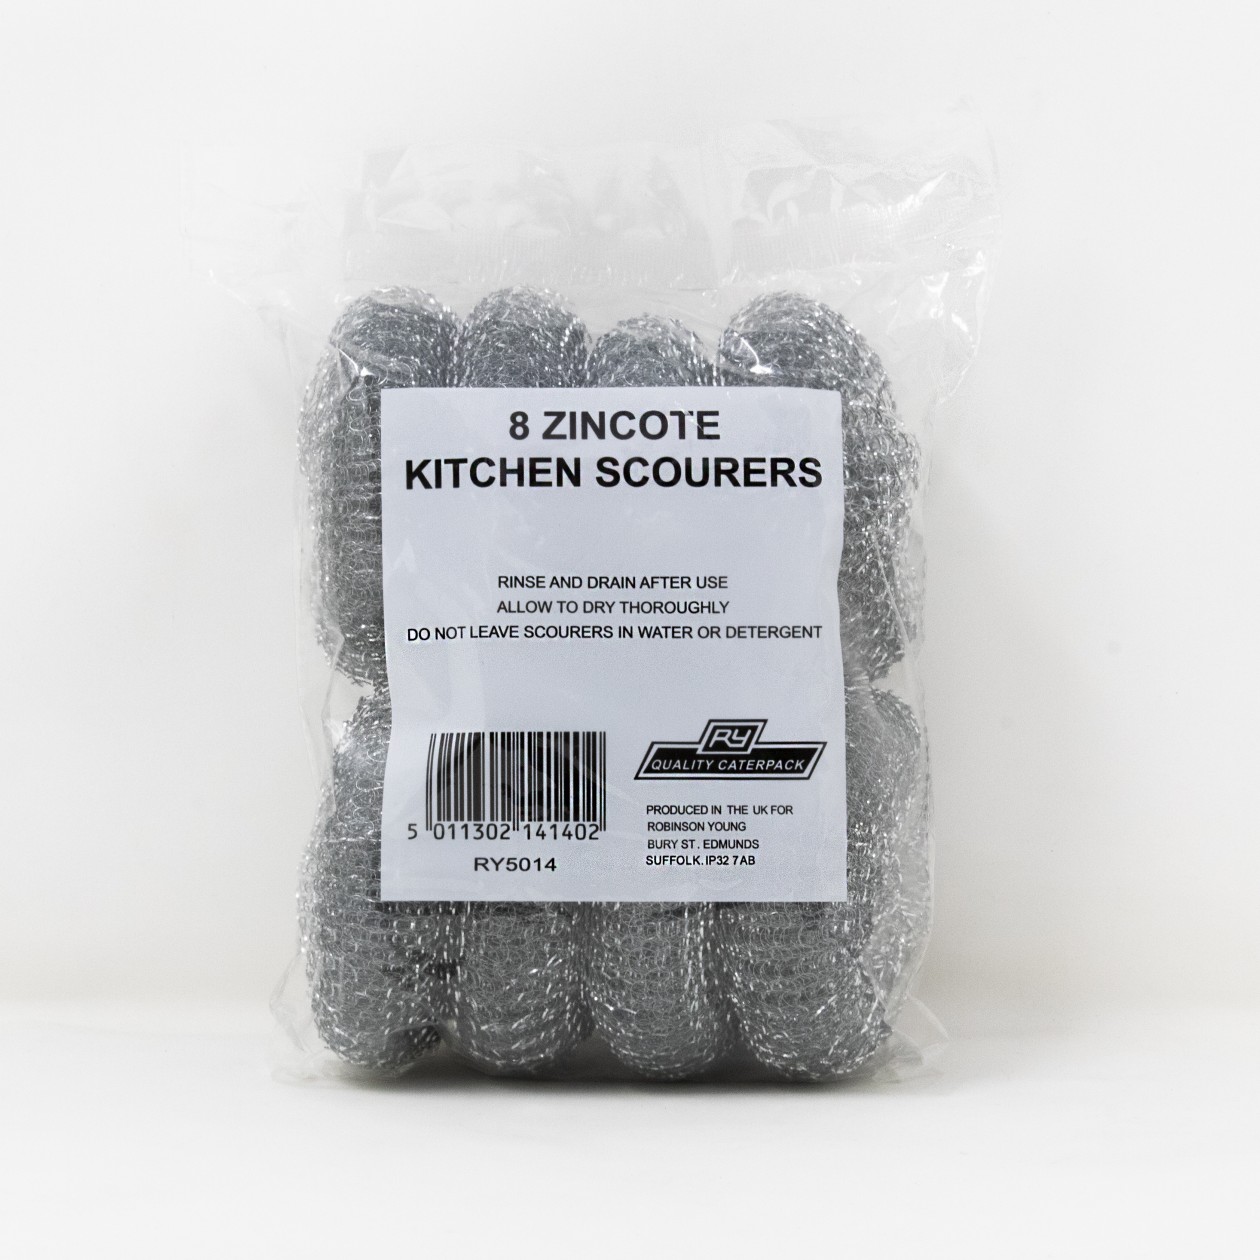 RY Quality Caterpack Large Zincote Scourers x 8